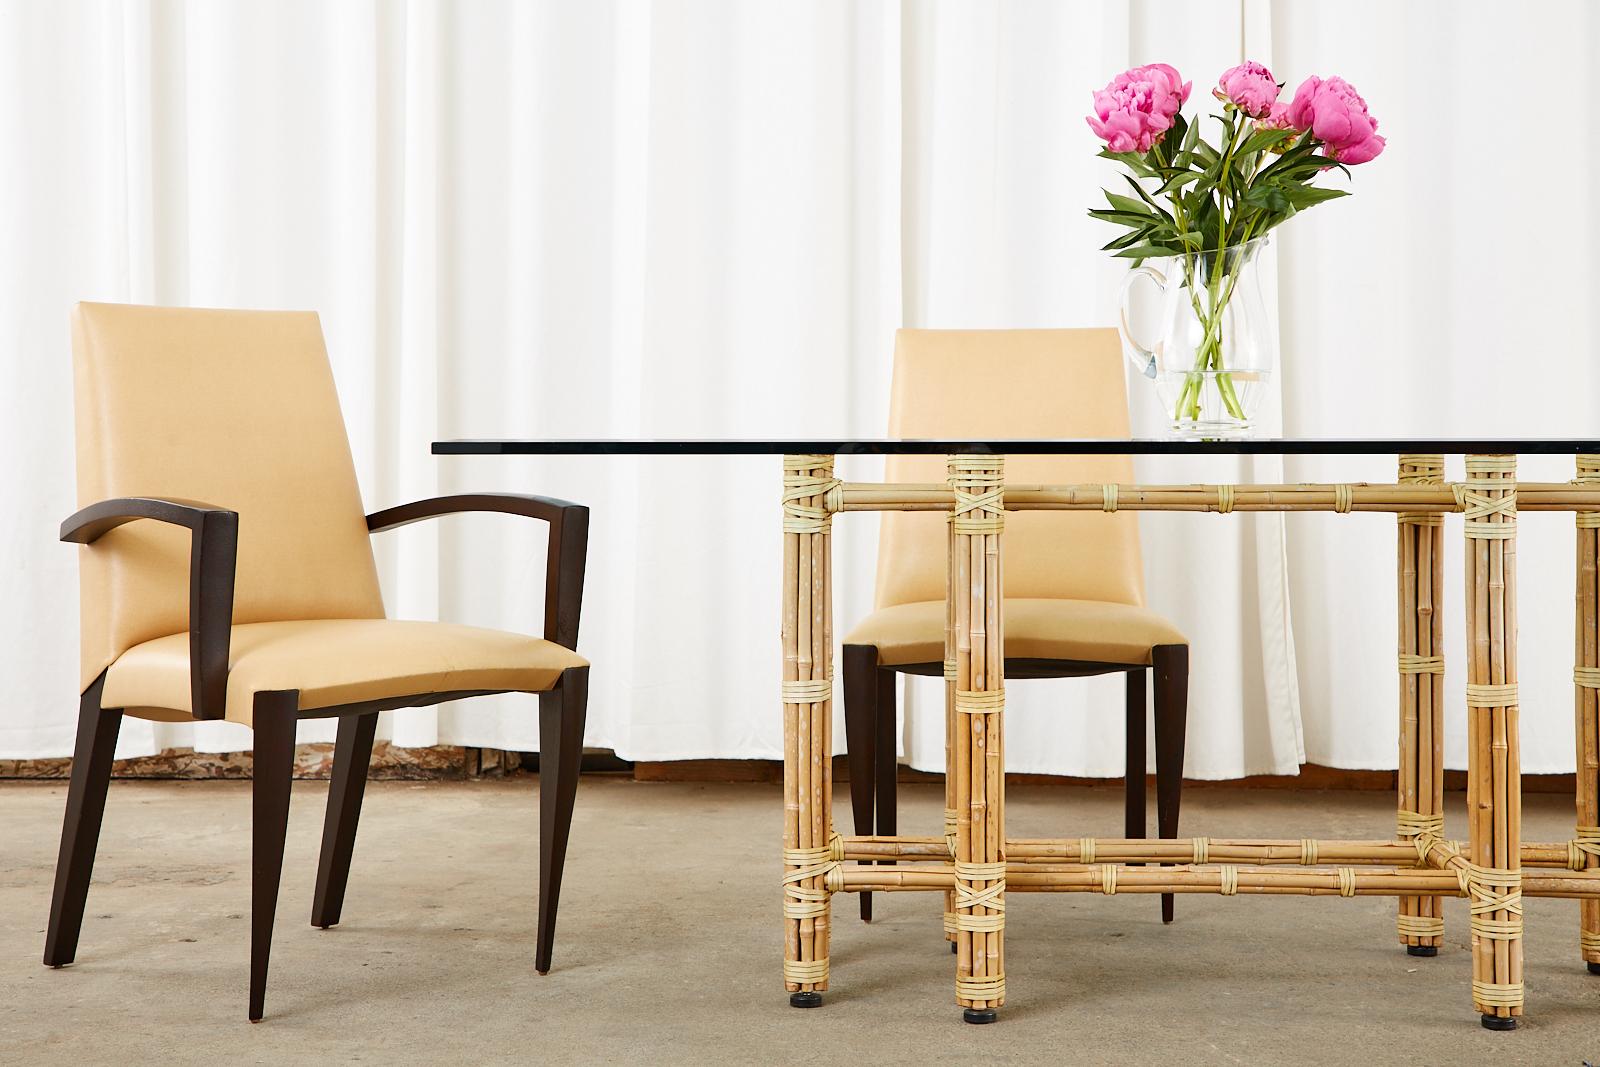 Stunning blonde bamboo and glass rectangular dining table made by McGuire (Model# MCBA22). Designed by John McGuire the table features an iron frame covered with bamboo poles lashed together with leather rawhide laces. Topped with a thick pane of